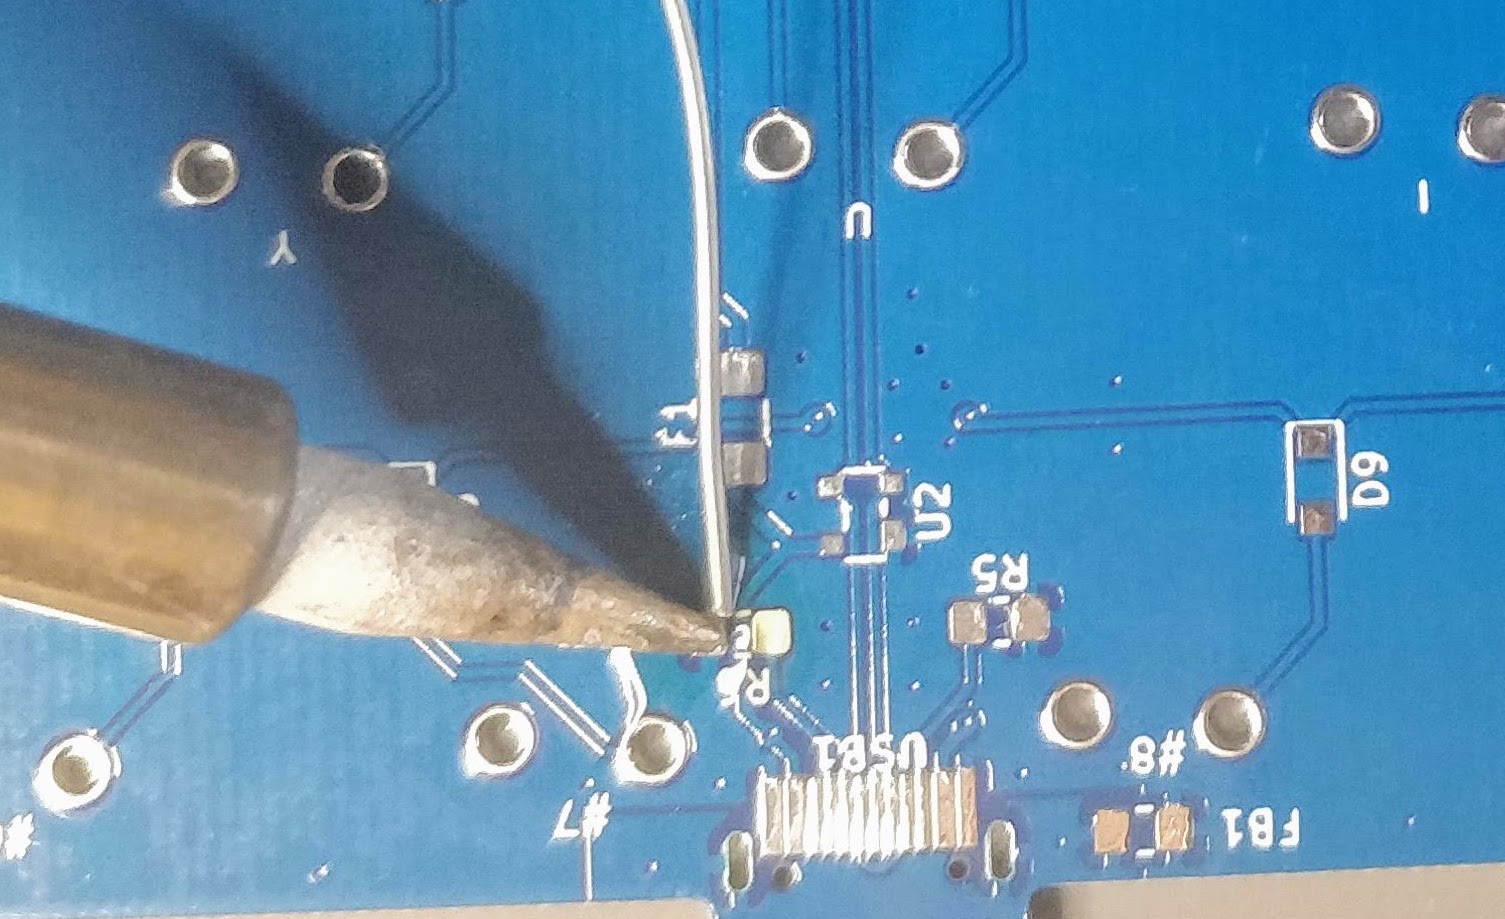 Adding a small amount of solder on pad